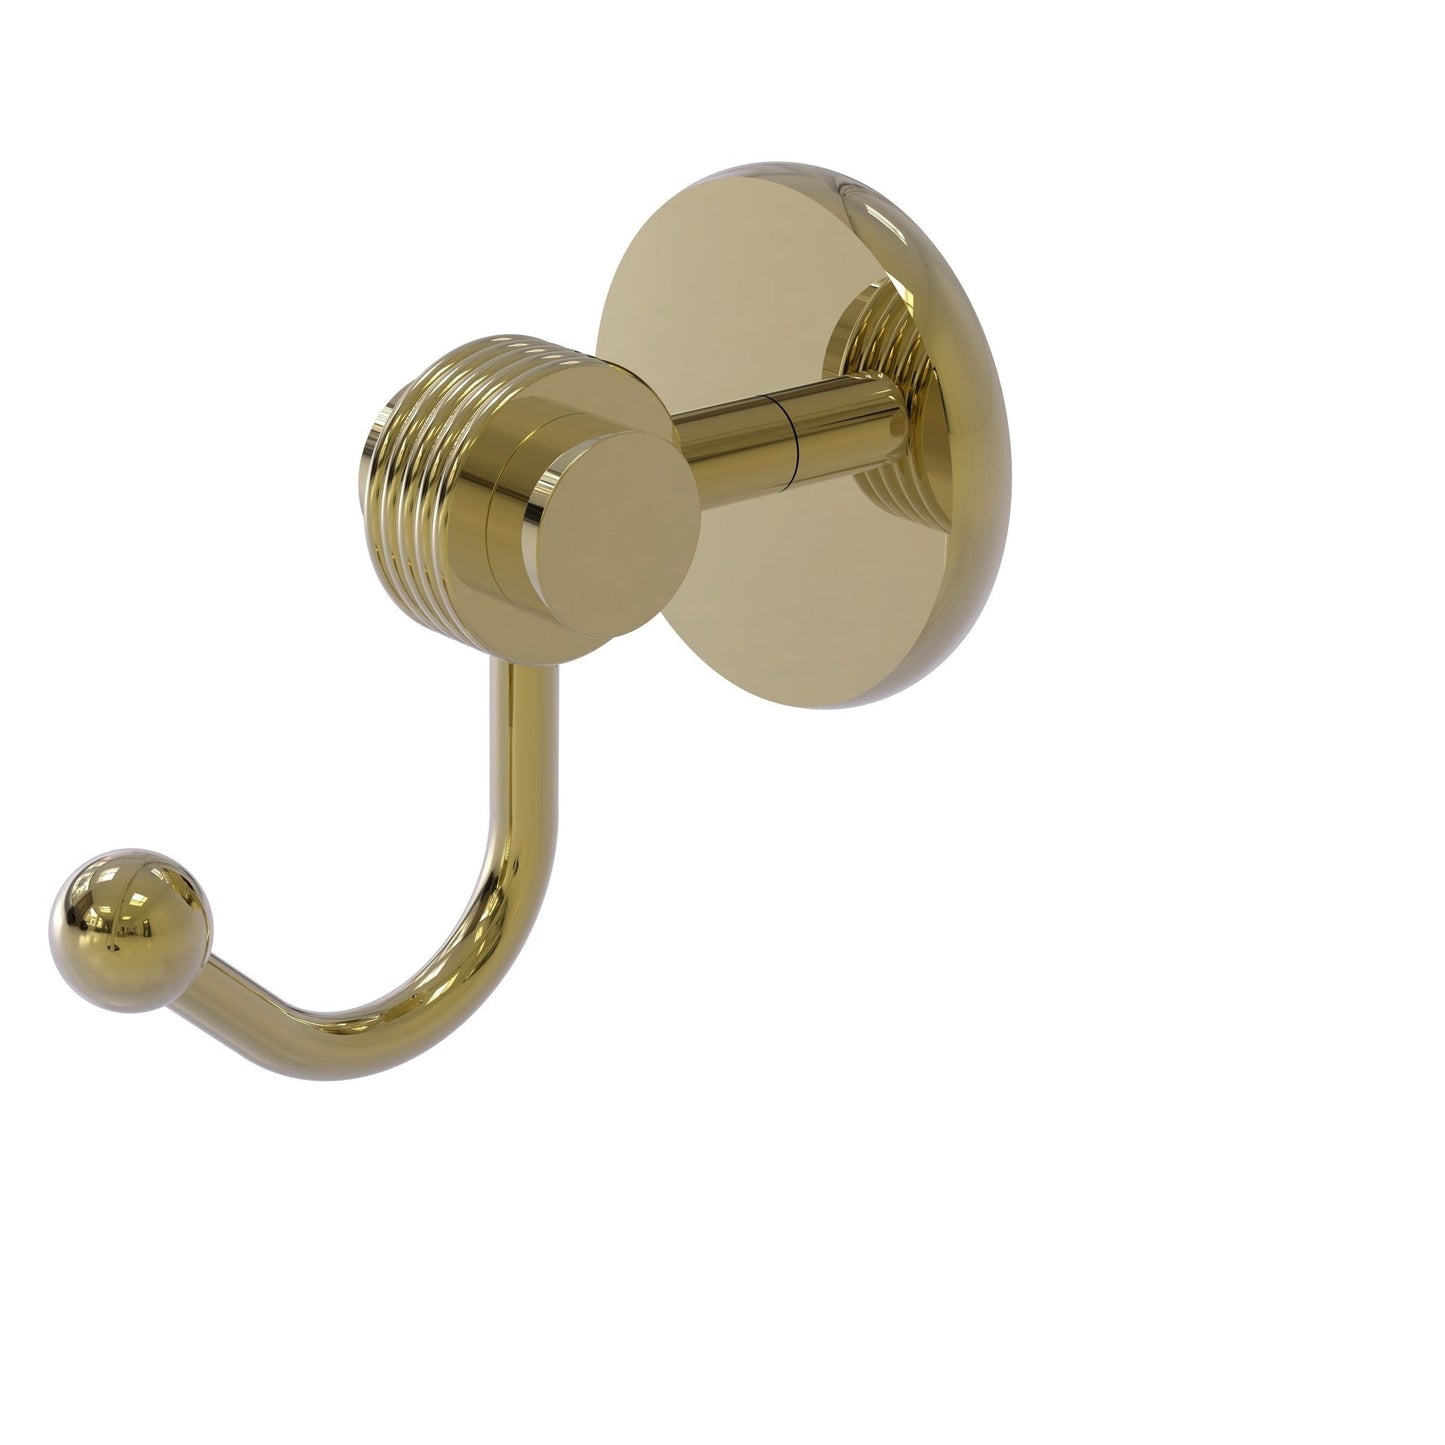 Allied Brass Satellite Orbit Two 2.77" x 4.54" Unlacquered Brass Solid Brass Robe Hook With Grooved Accents